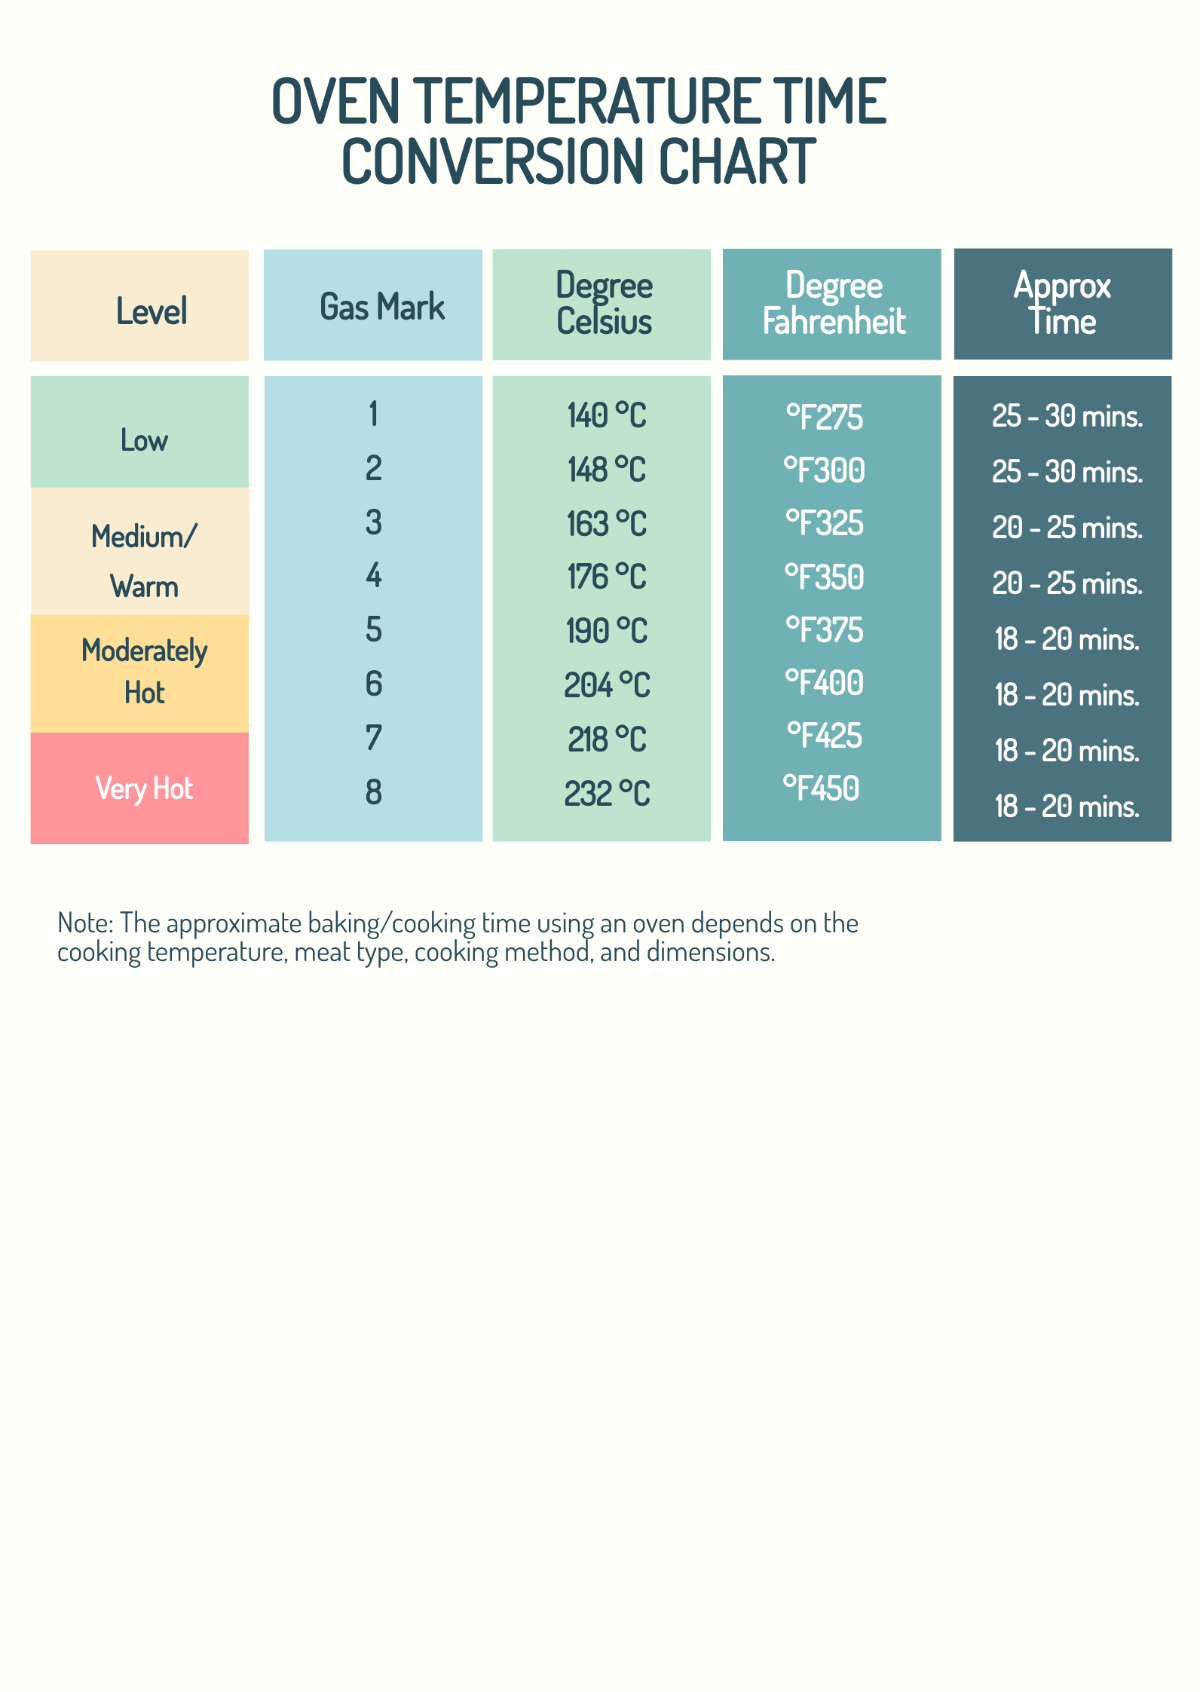 Oven Temperature Time Conversion Chart Template